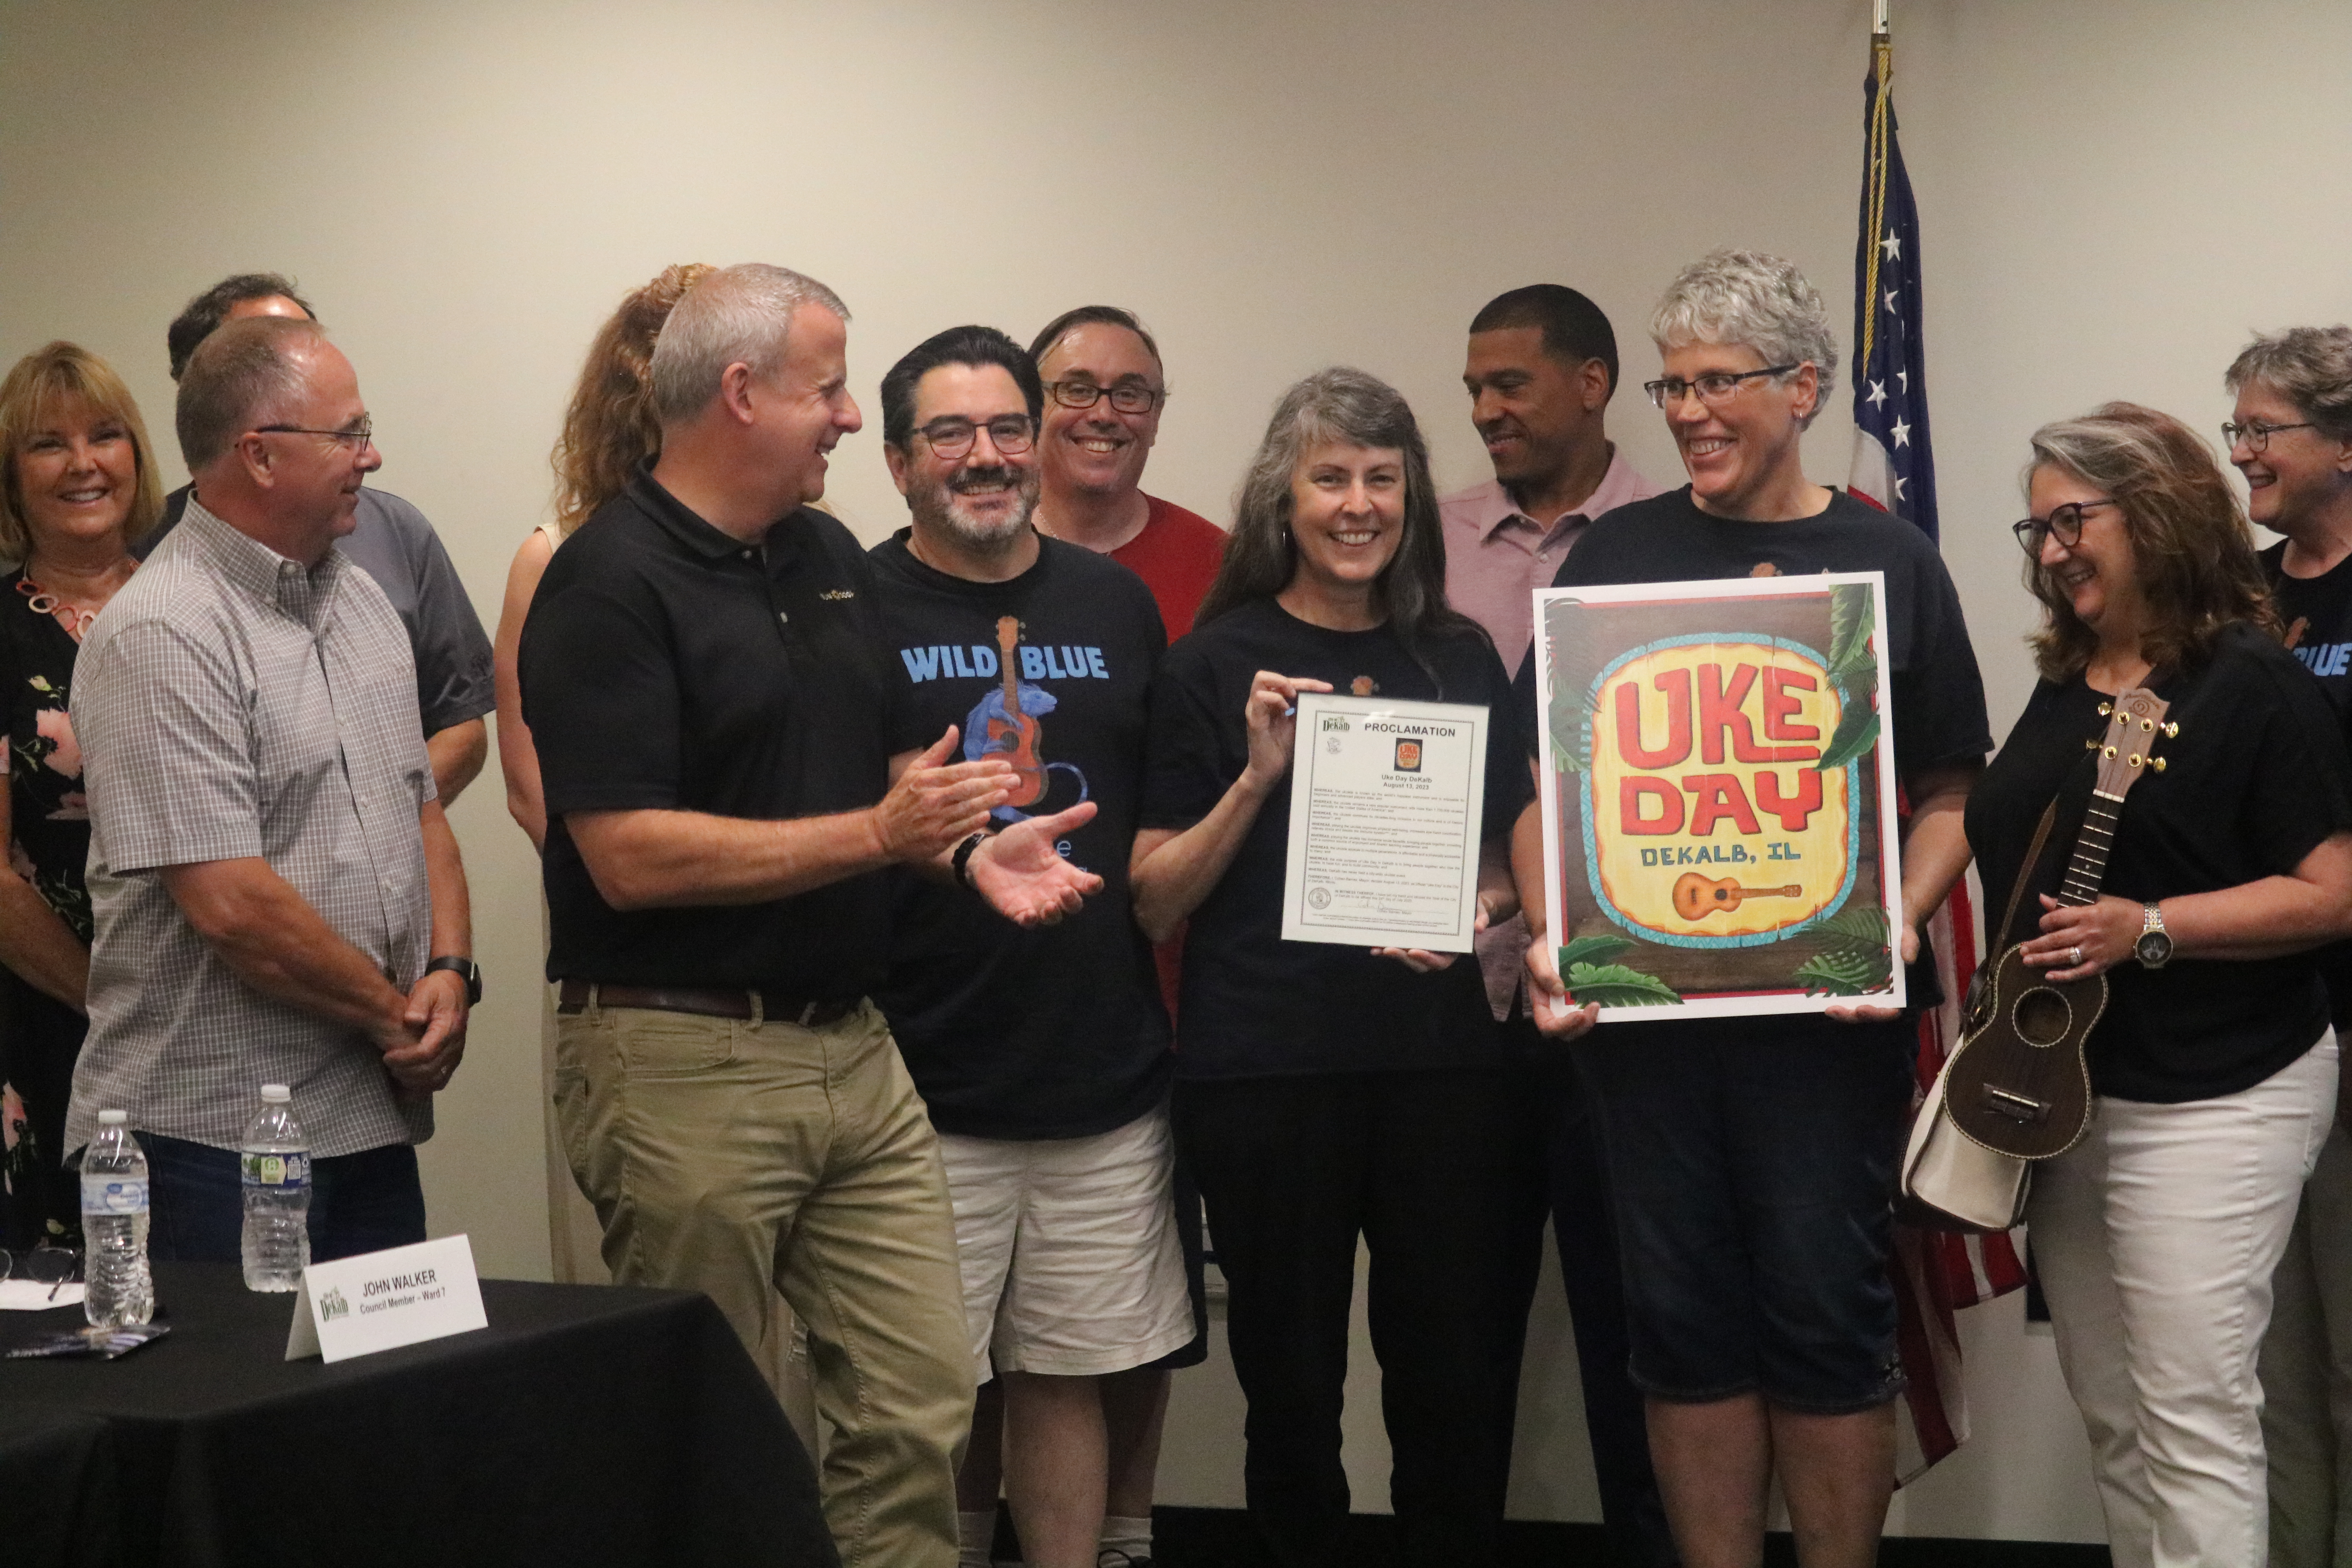 Uke Day aims to strike a chord with DeKalb community pic